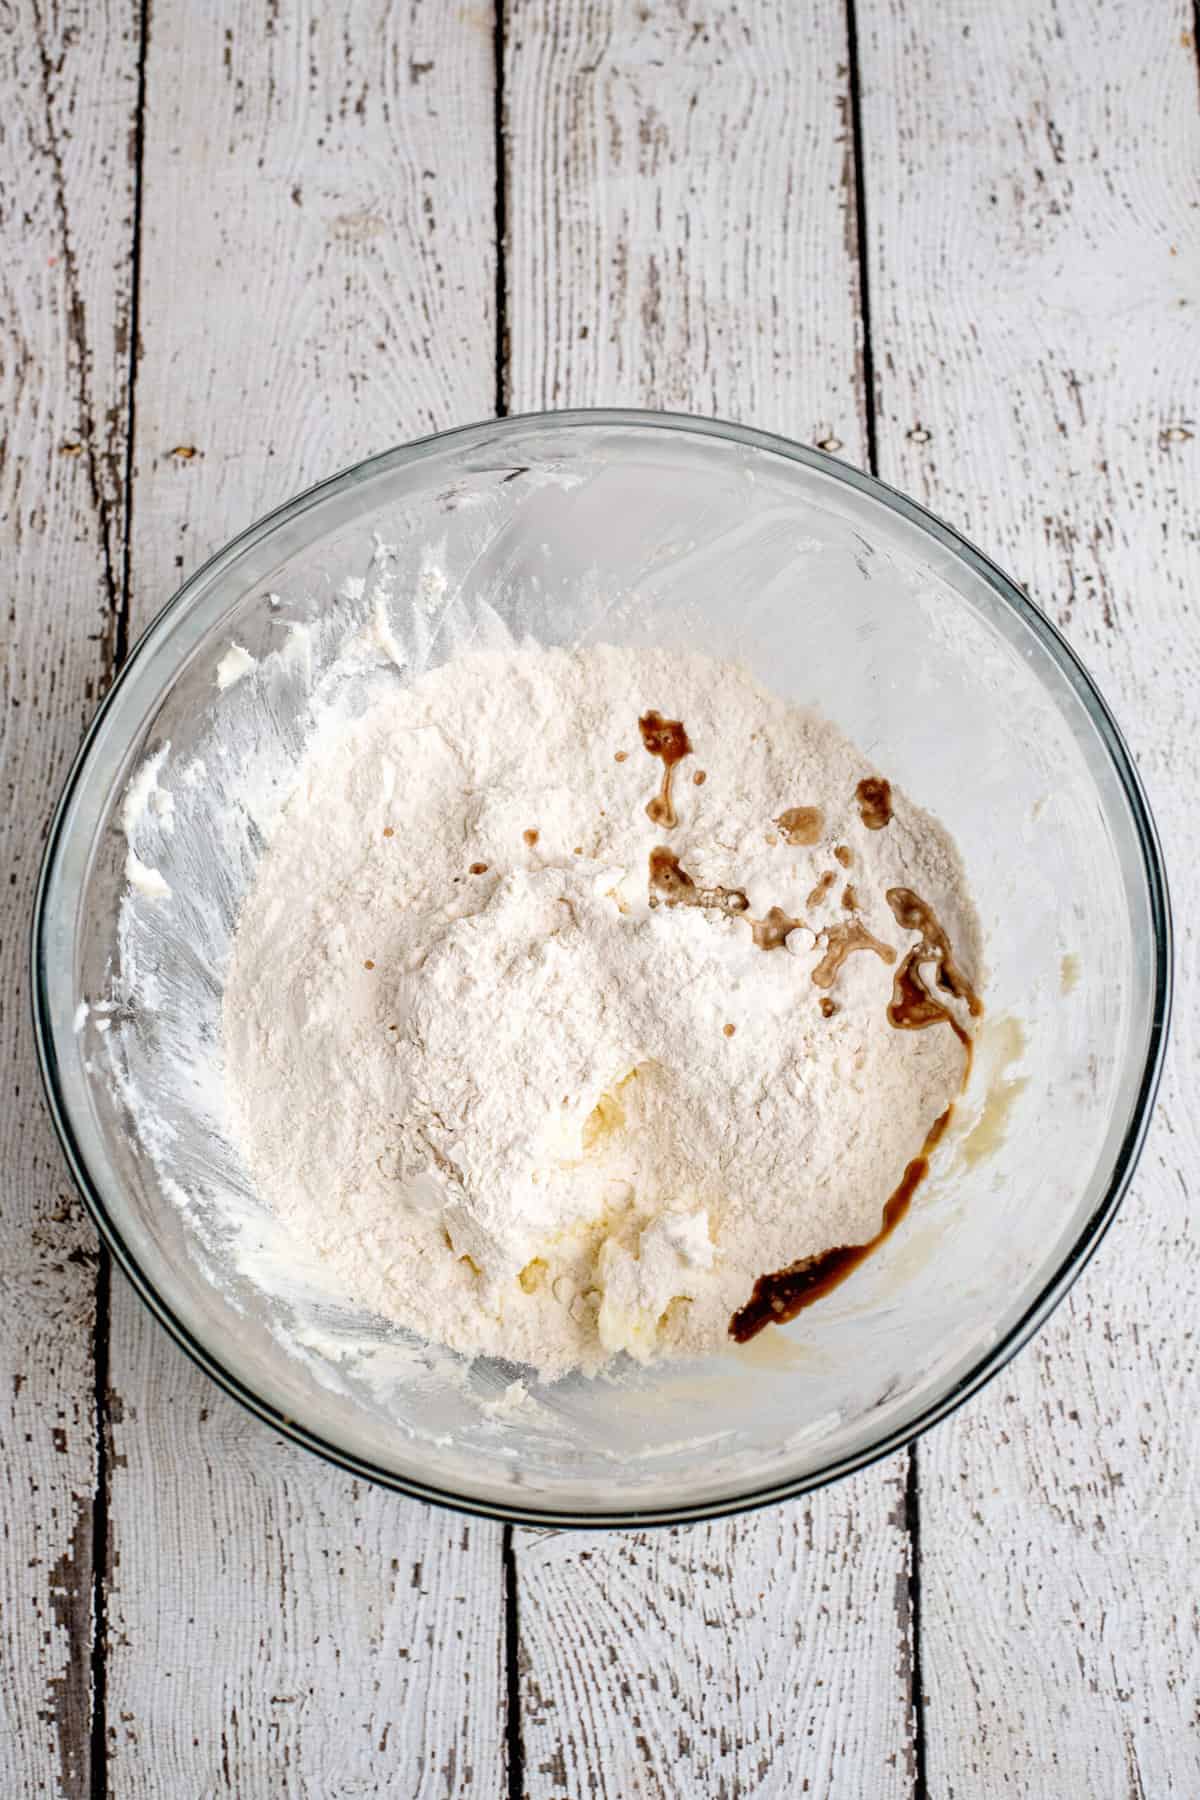 mix in flour and sugar until well-combined and add vanilla